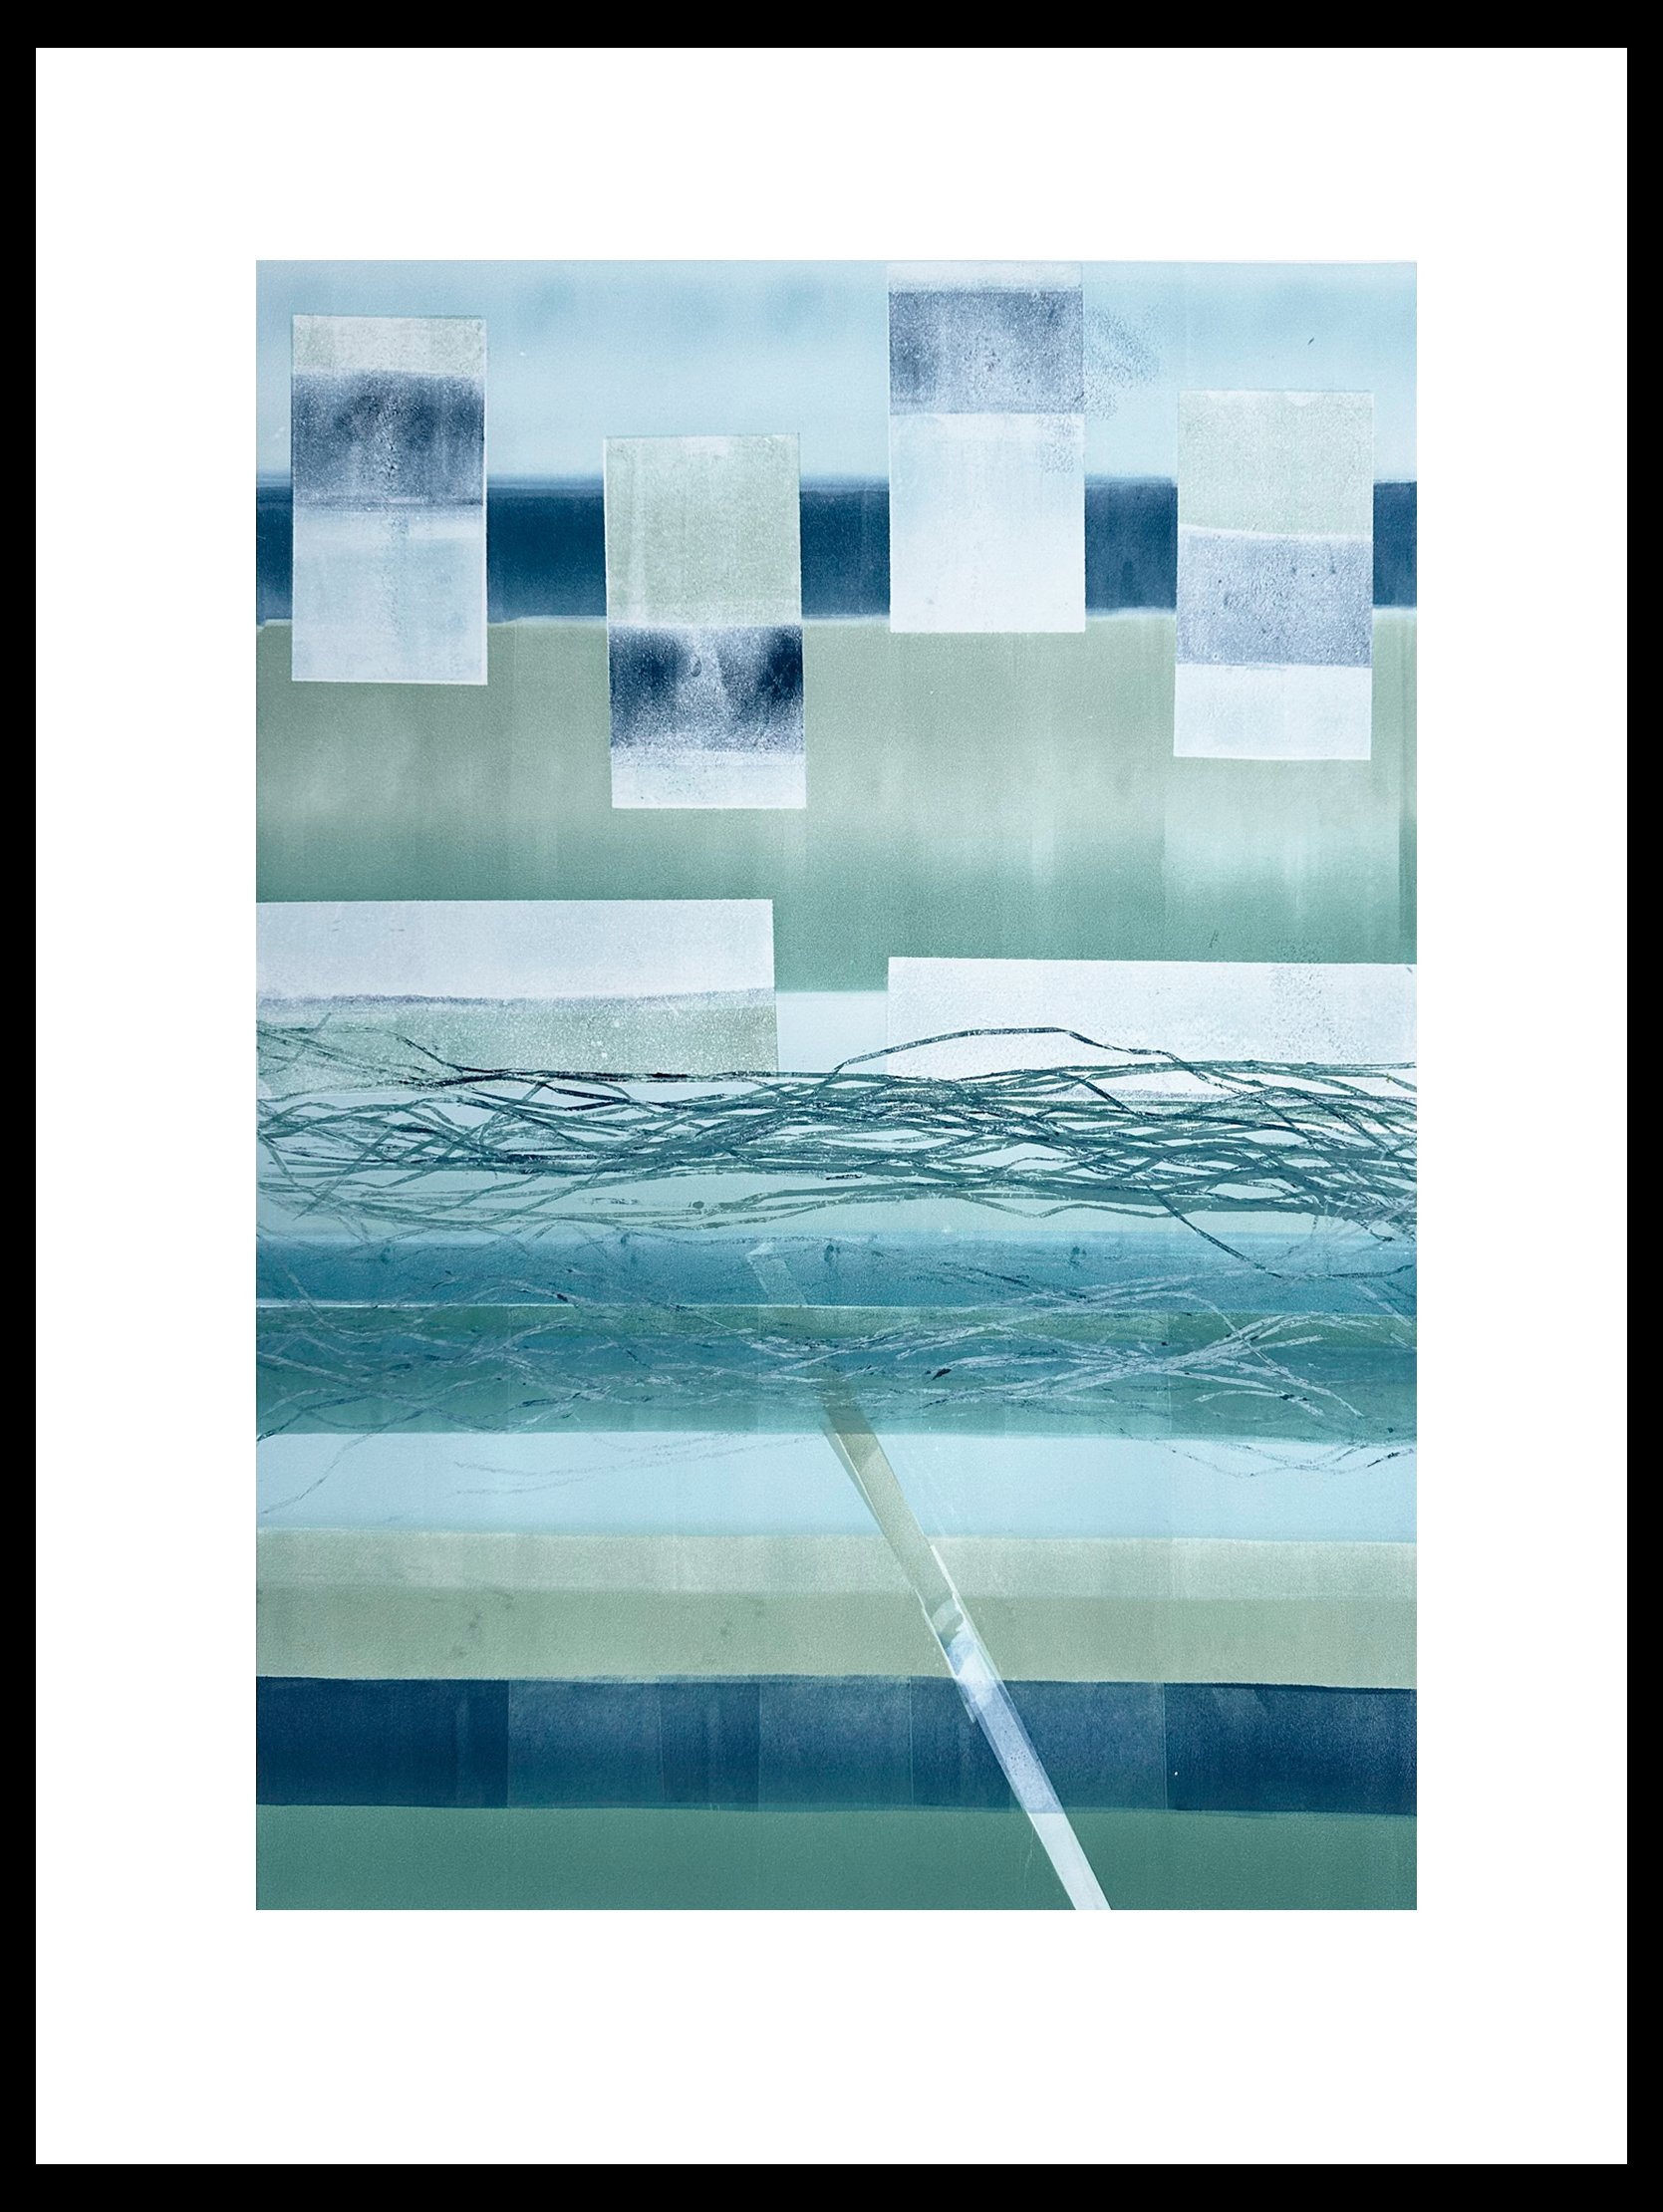   "The River's Melody" &nbsp;(monotype) through the interplay of color and form, this abstract imagery presents the rhythm of a river. The deep blues and greens, reminiscent of cool, refreshing water offer a visual symphony. Take time, slow down, los